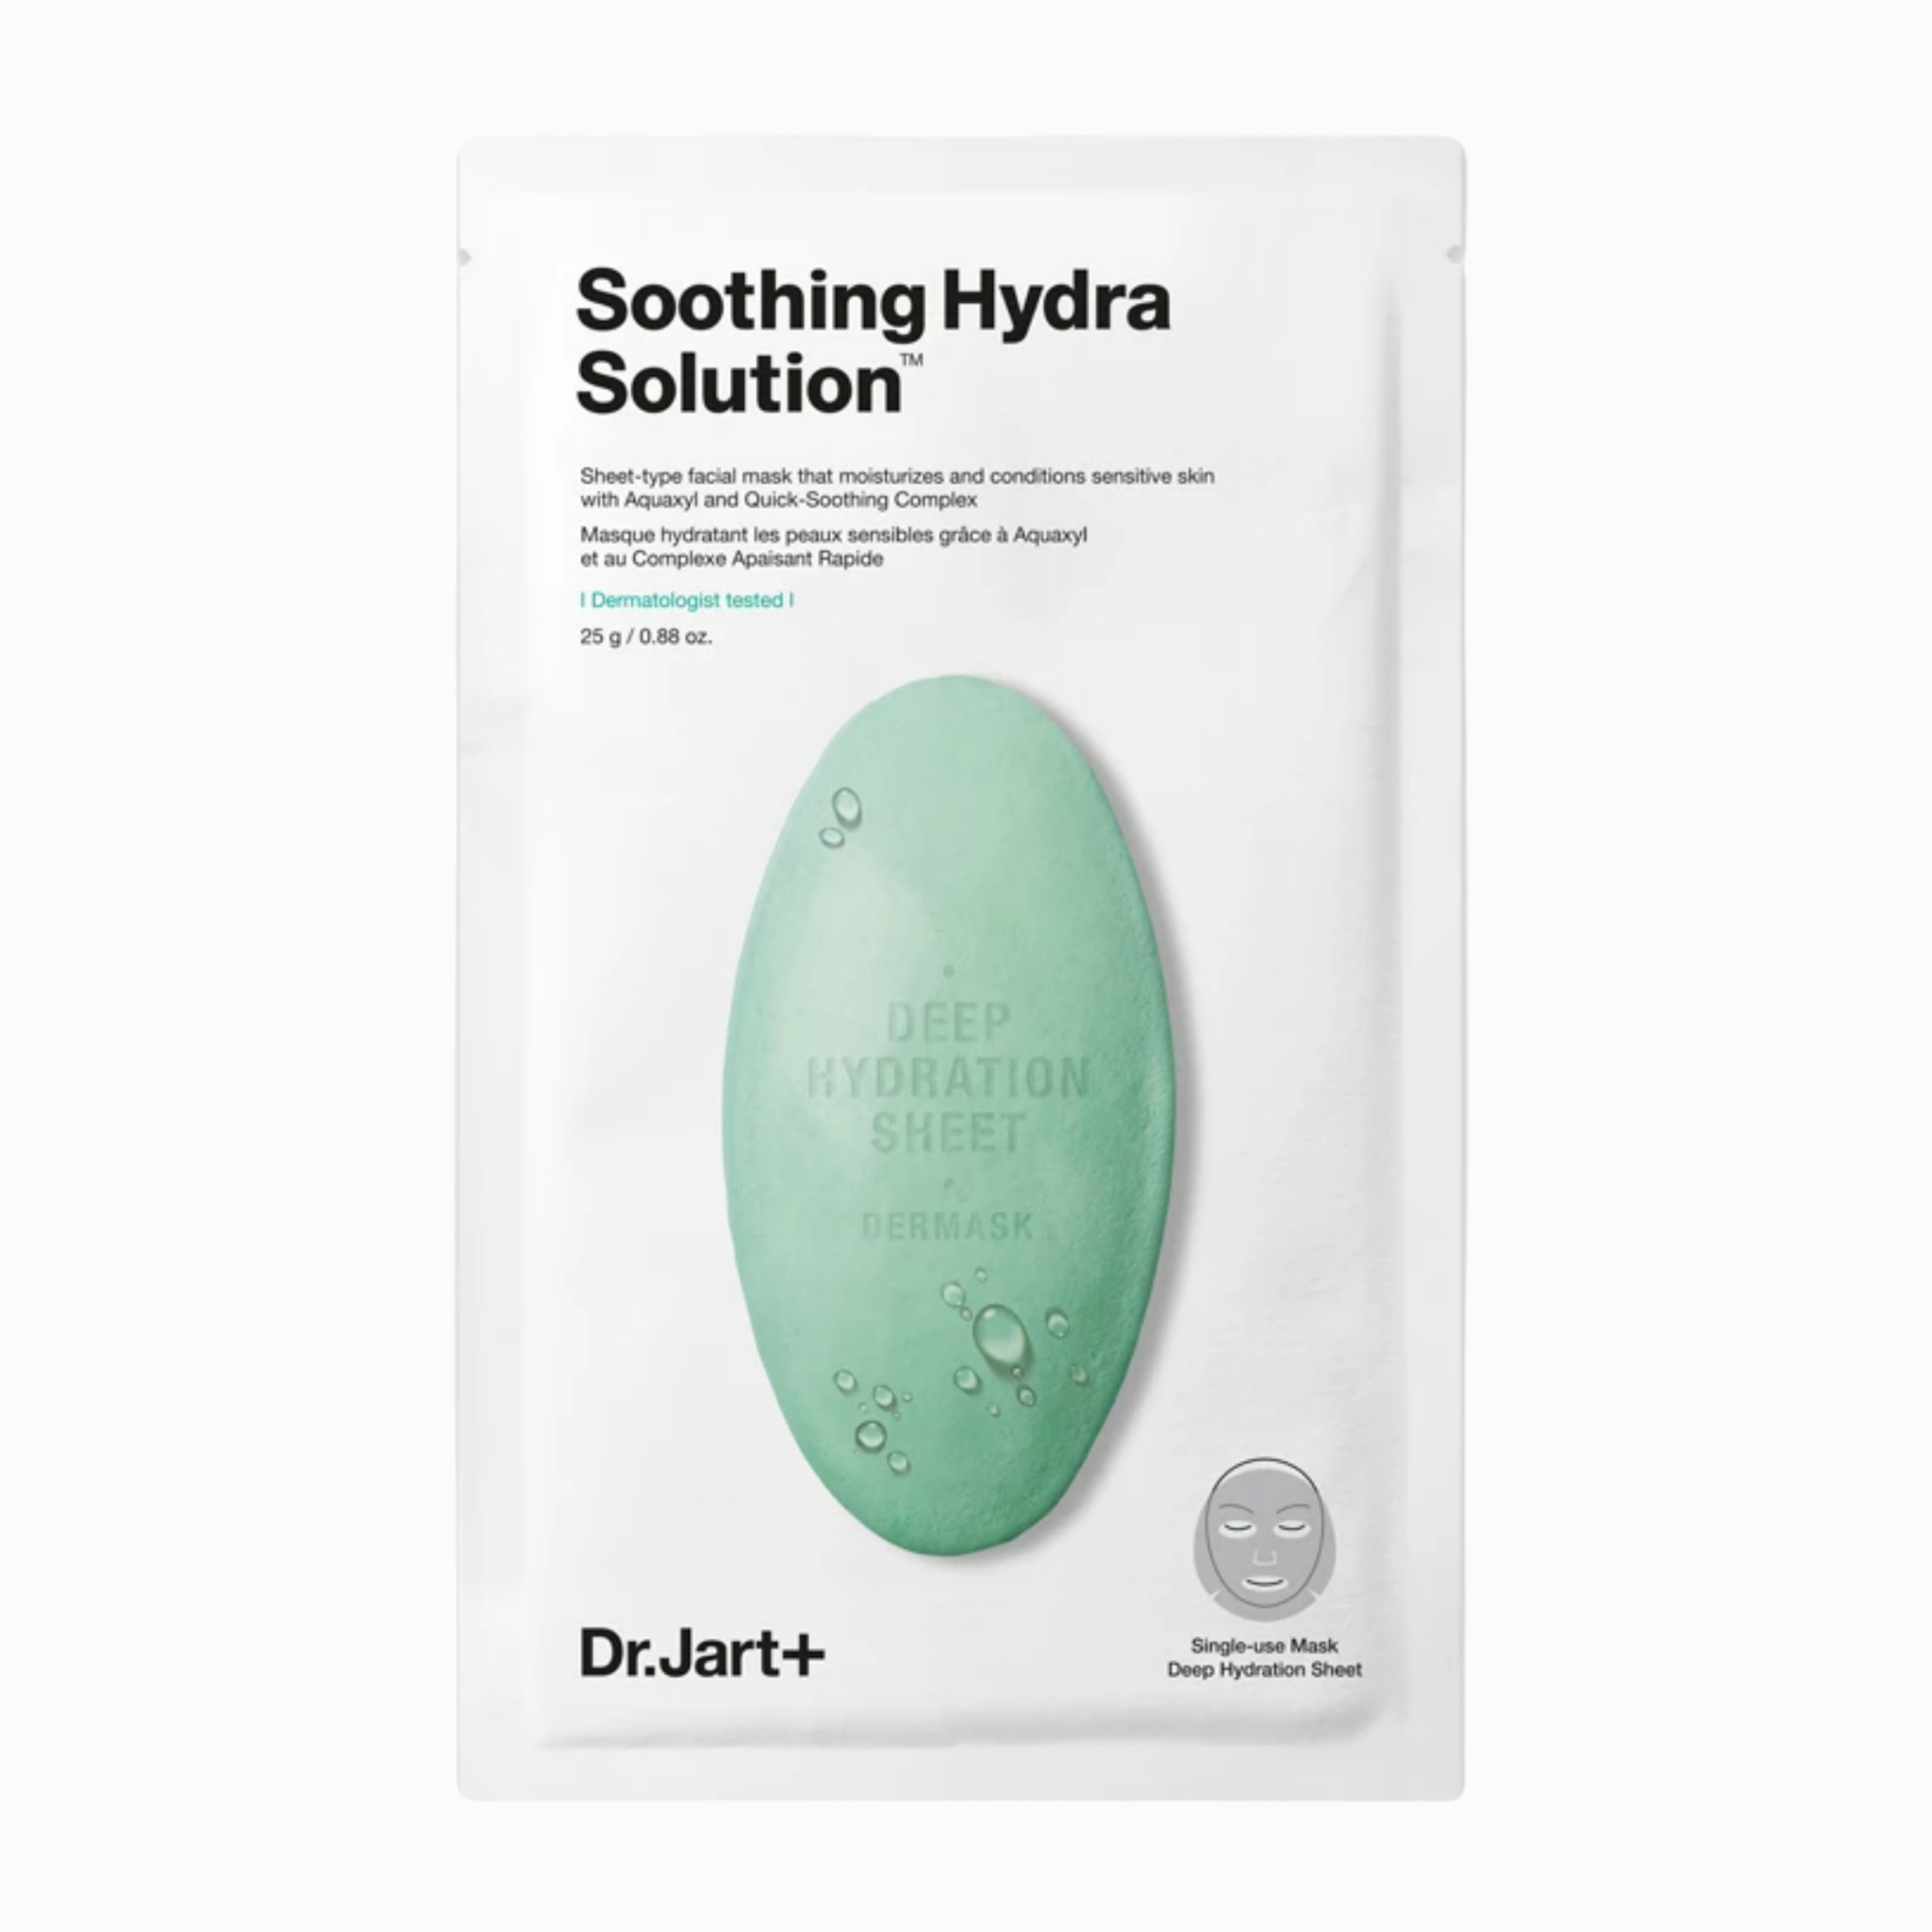 DERMASK WATER JET SOOTHING HYDRA SOLUTION